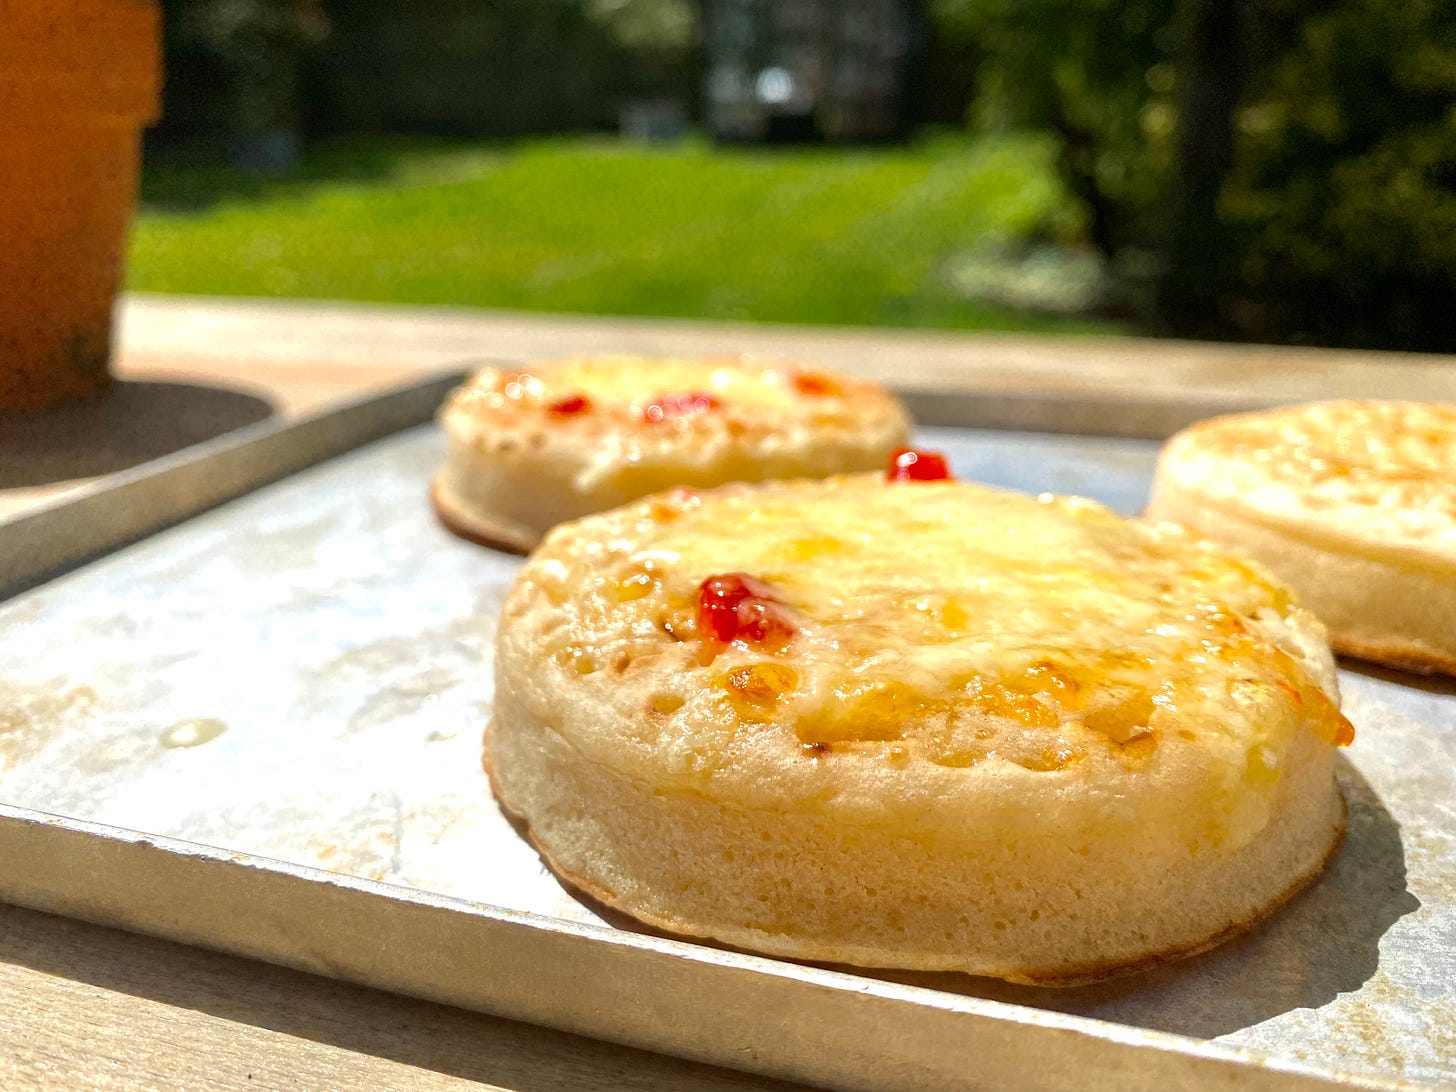 Cheese topped crumpets with flecks of chilli jam on a metal oven tray, in the garde.